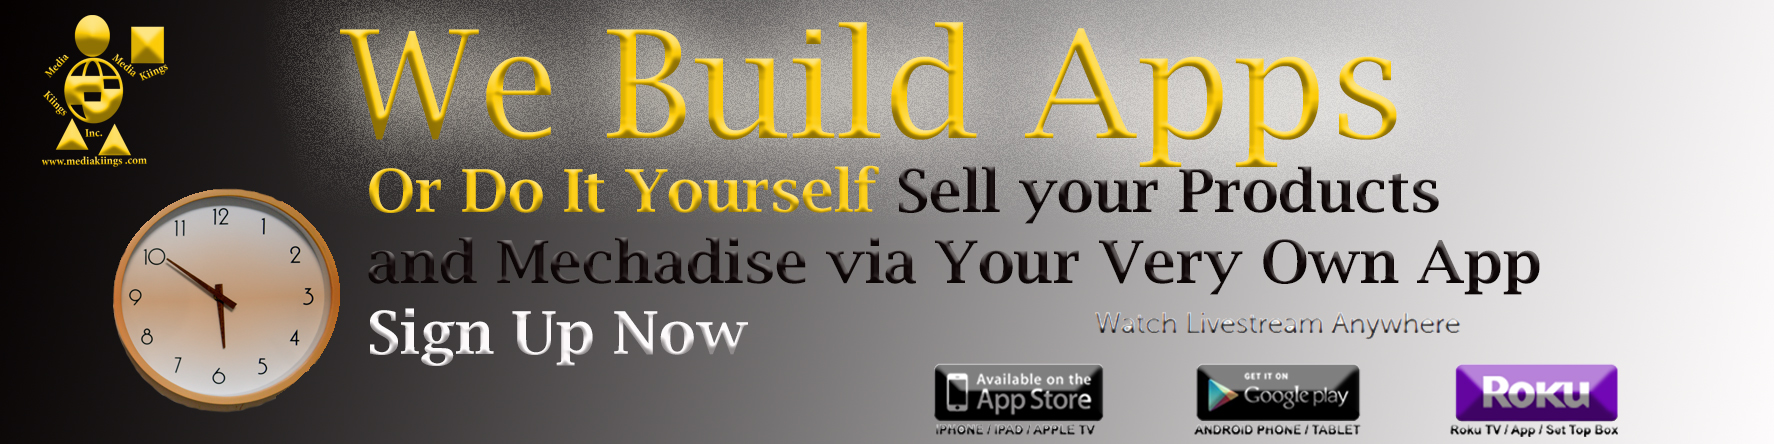 Get Your Own App Today